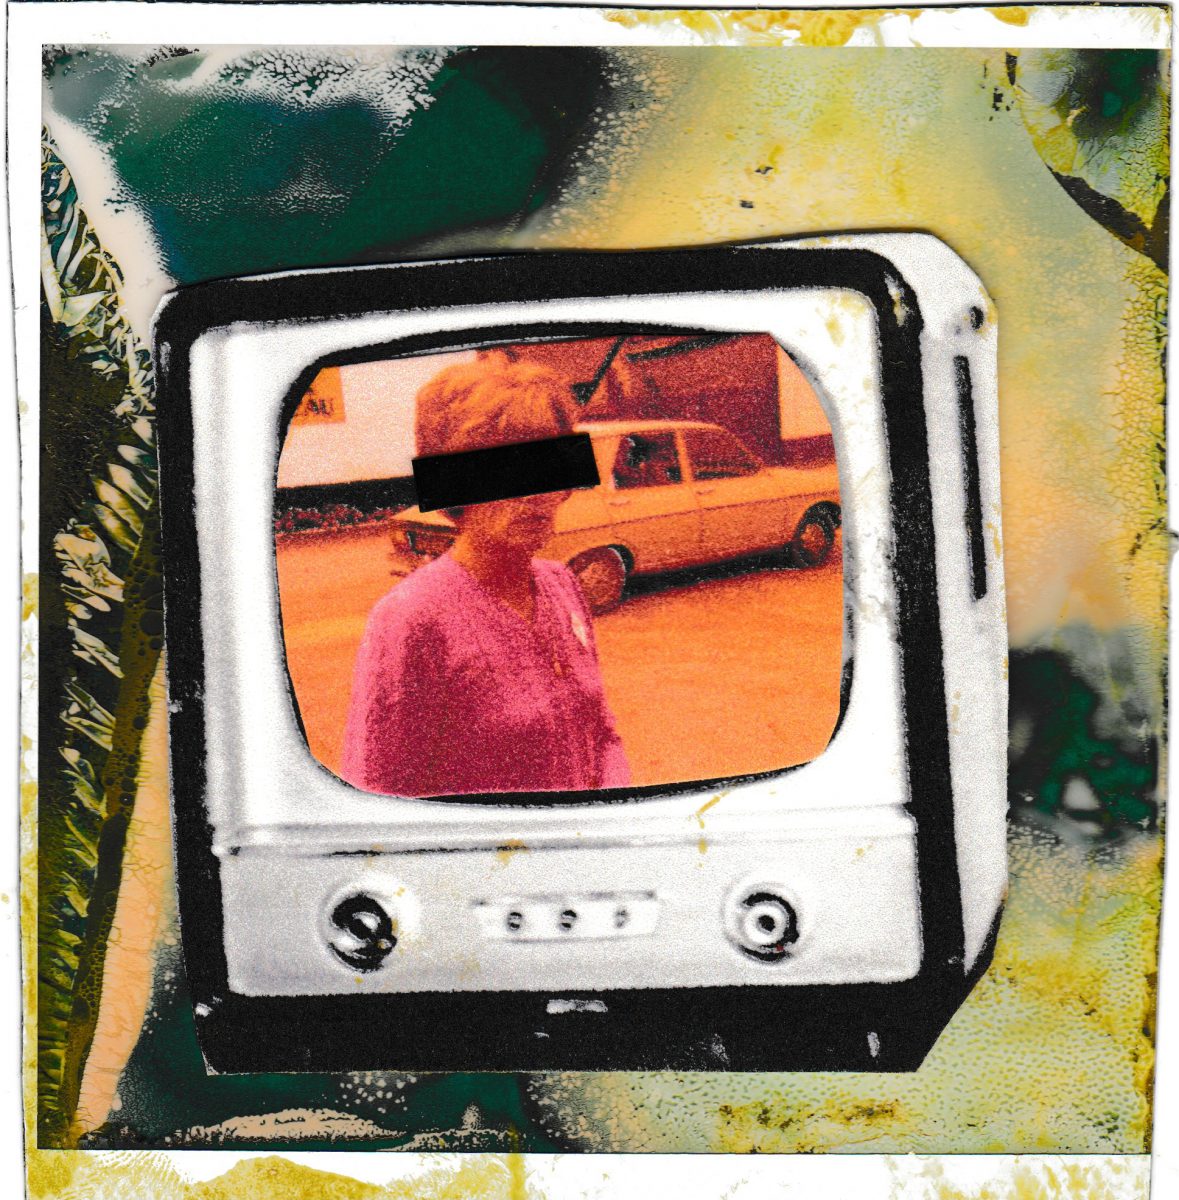 A collage of an old television set. In the centre, a woman with a pink jumper stands in front of an old yellow car. She has a black box covering her eyes. Surrounding the white TV with black outlining are splatters of yellow and green.